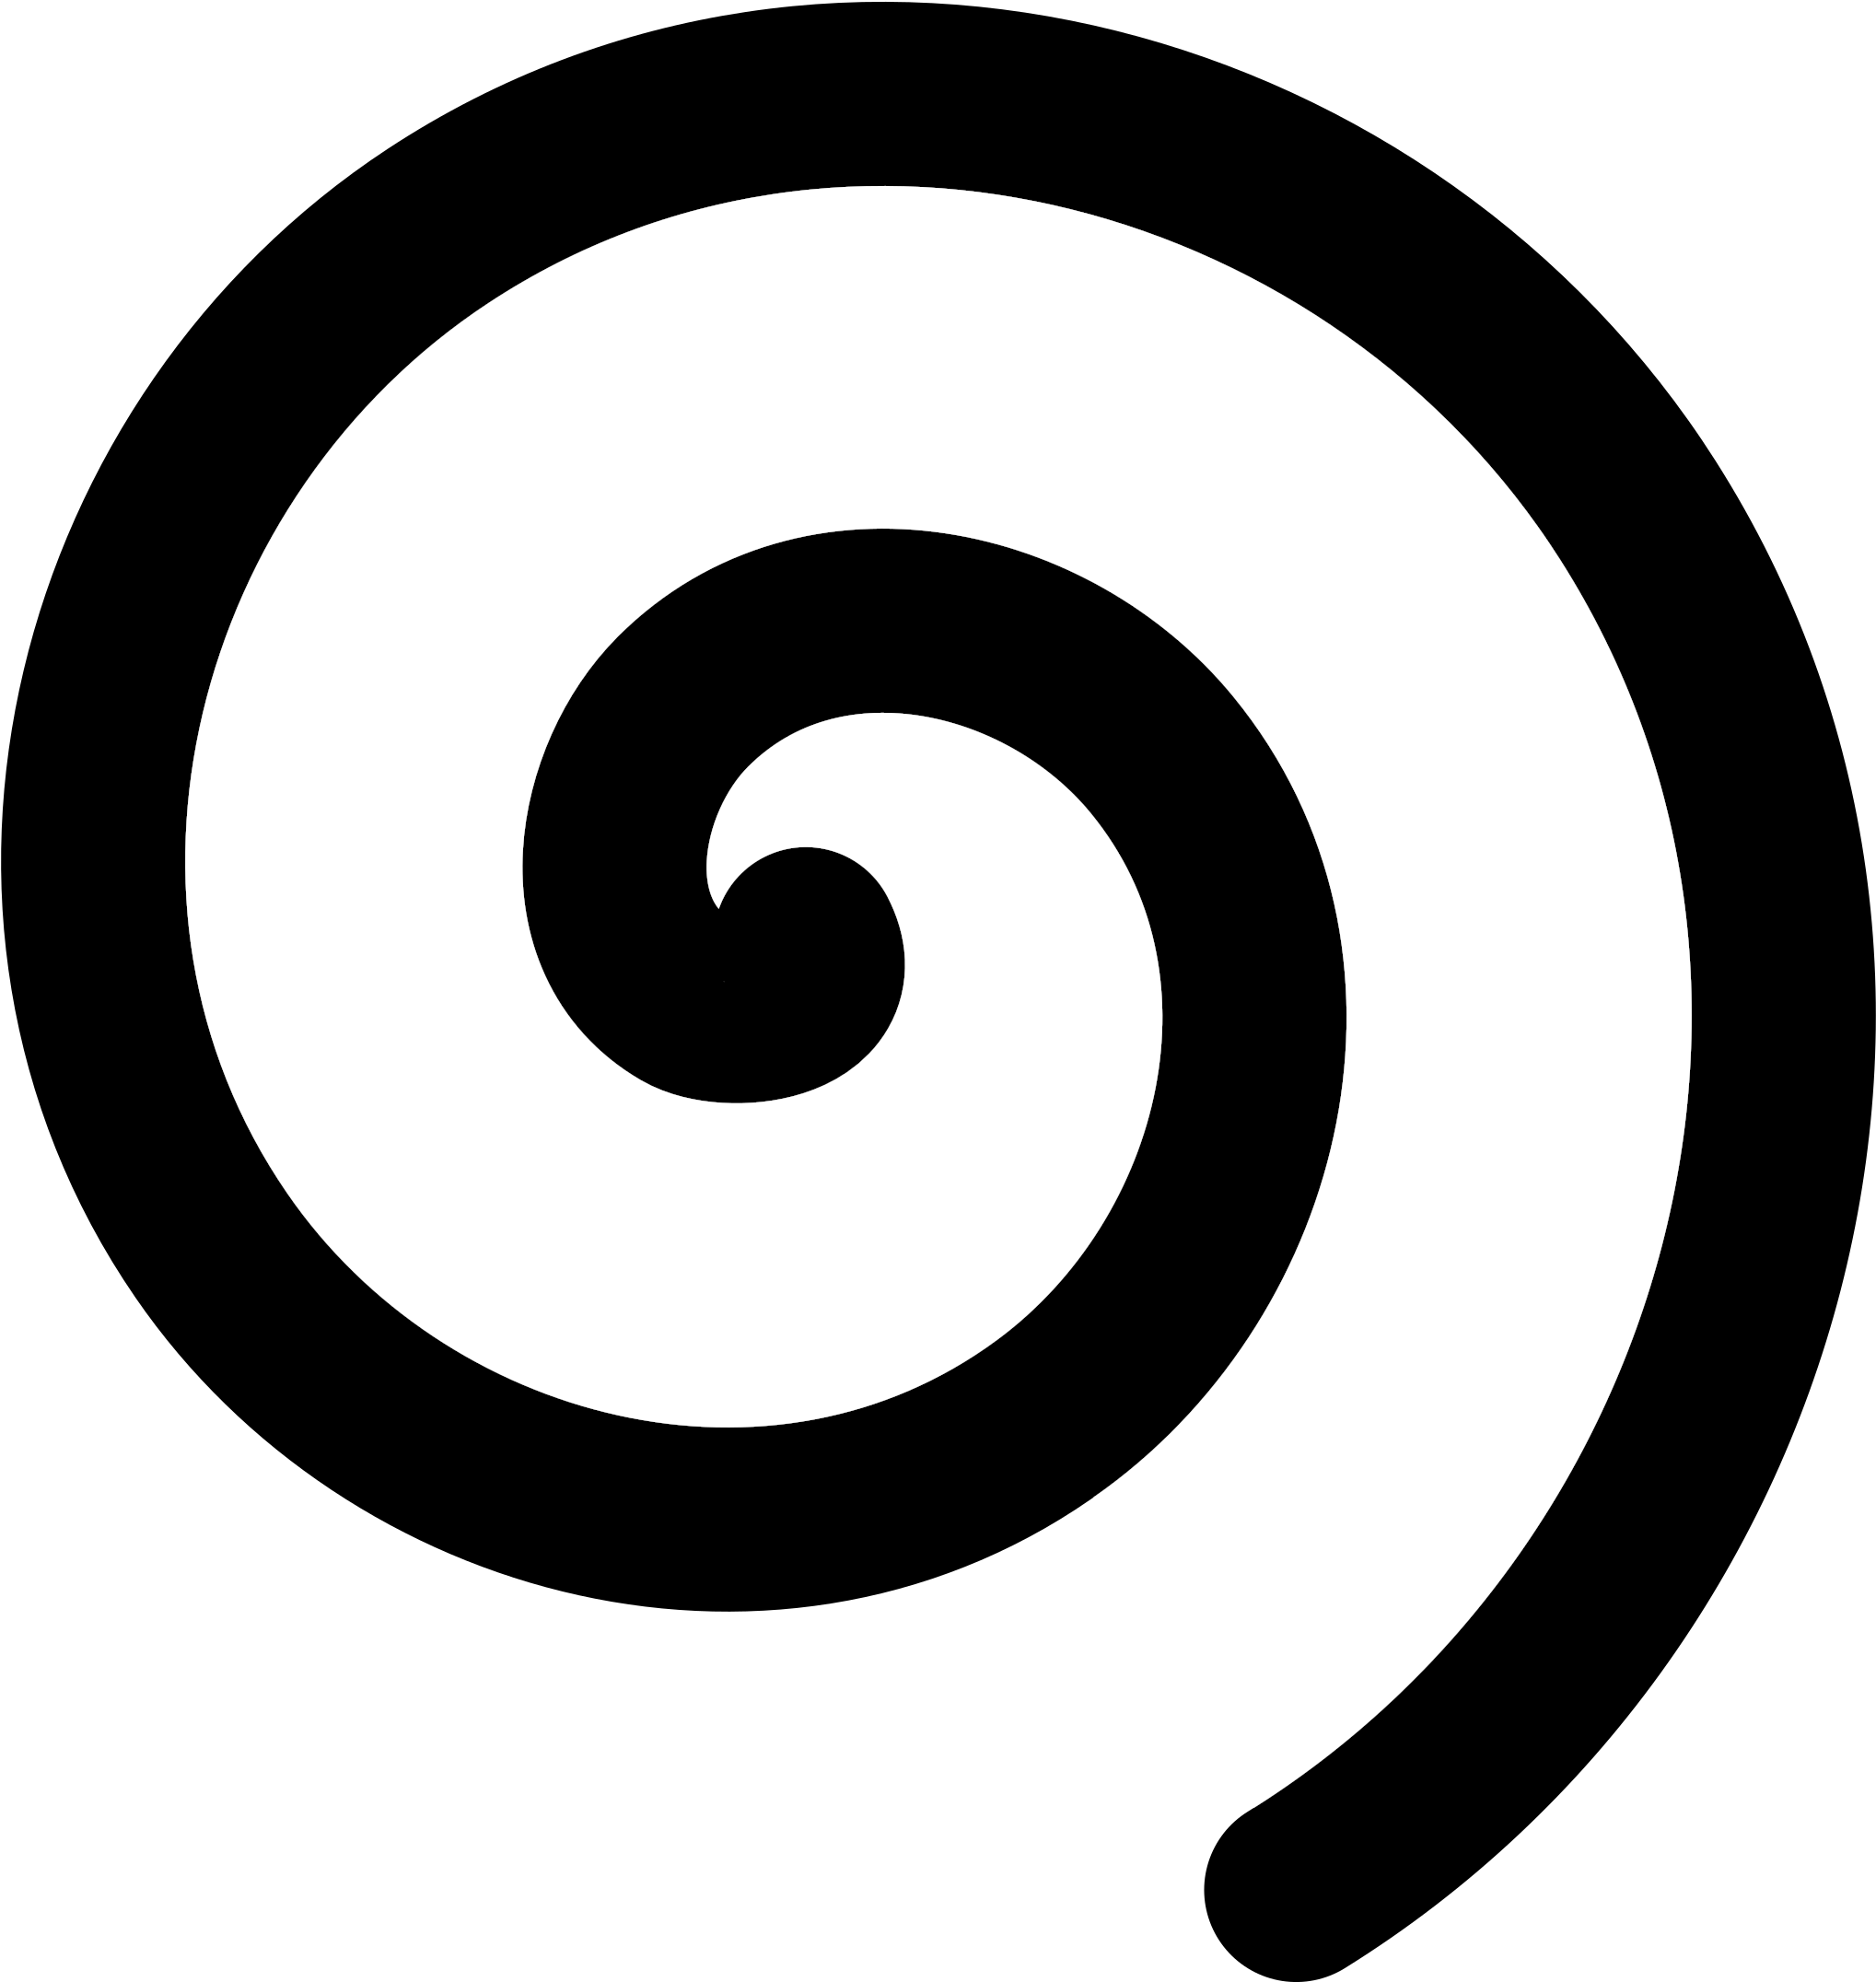 Spiral Clipart Black And White - Spiral Clipart Black And White (2400x2400)